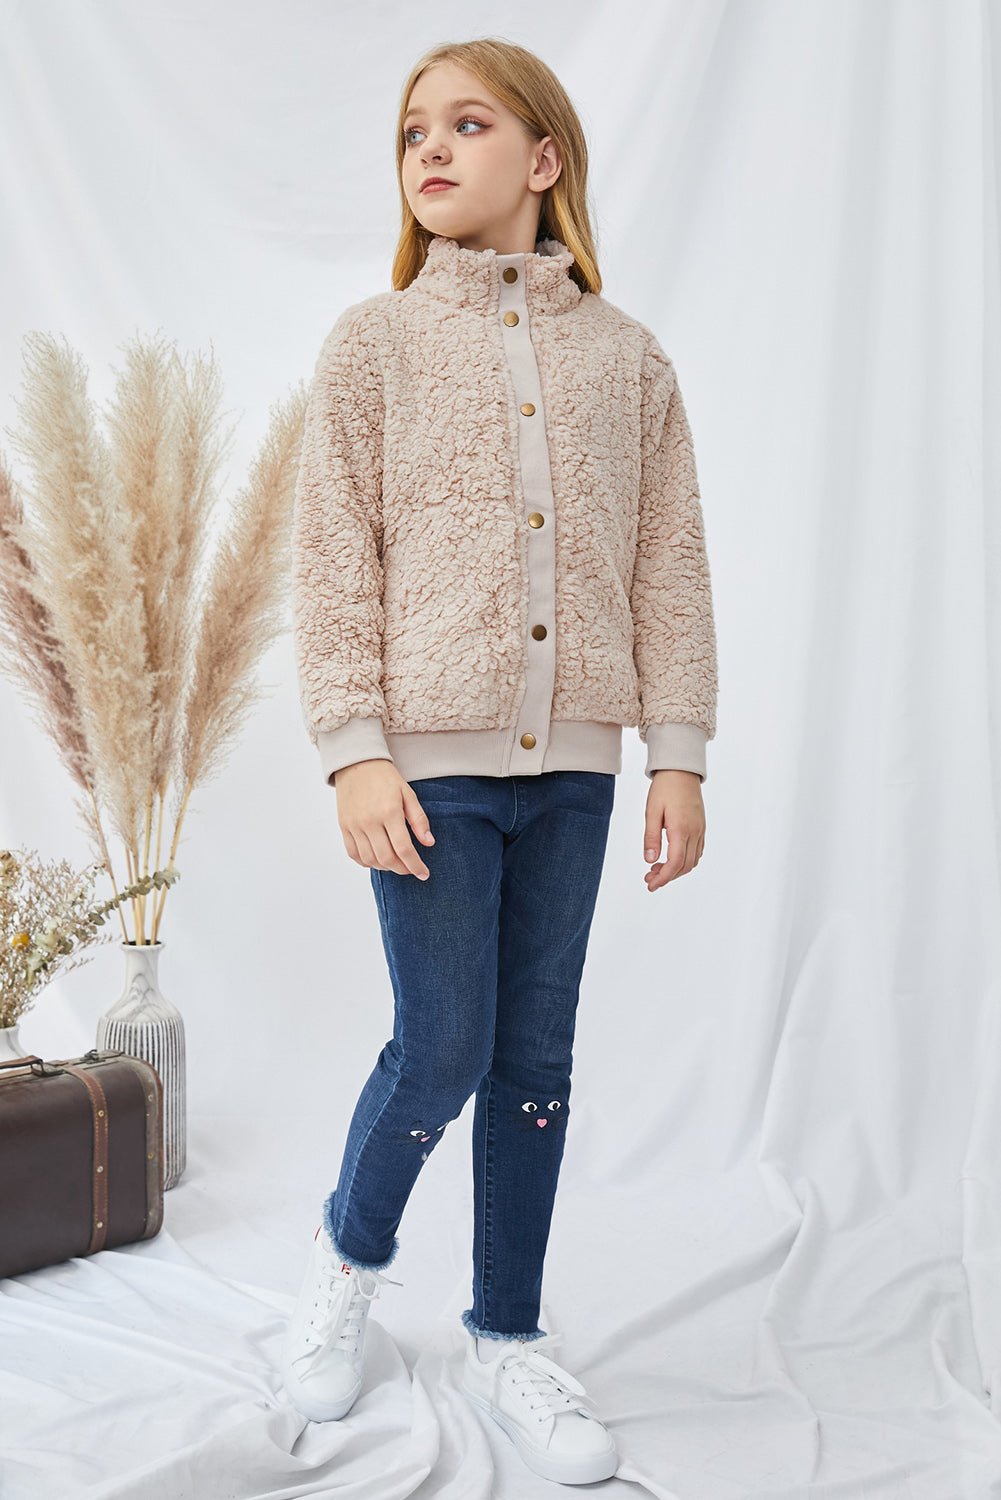 Girls Snap Front Teddy Jacket - Fashion Girl Online Store